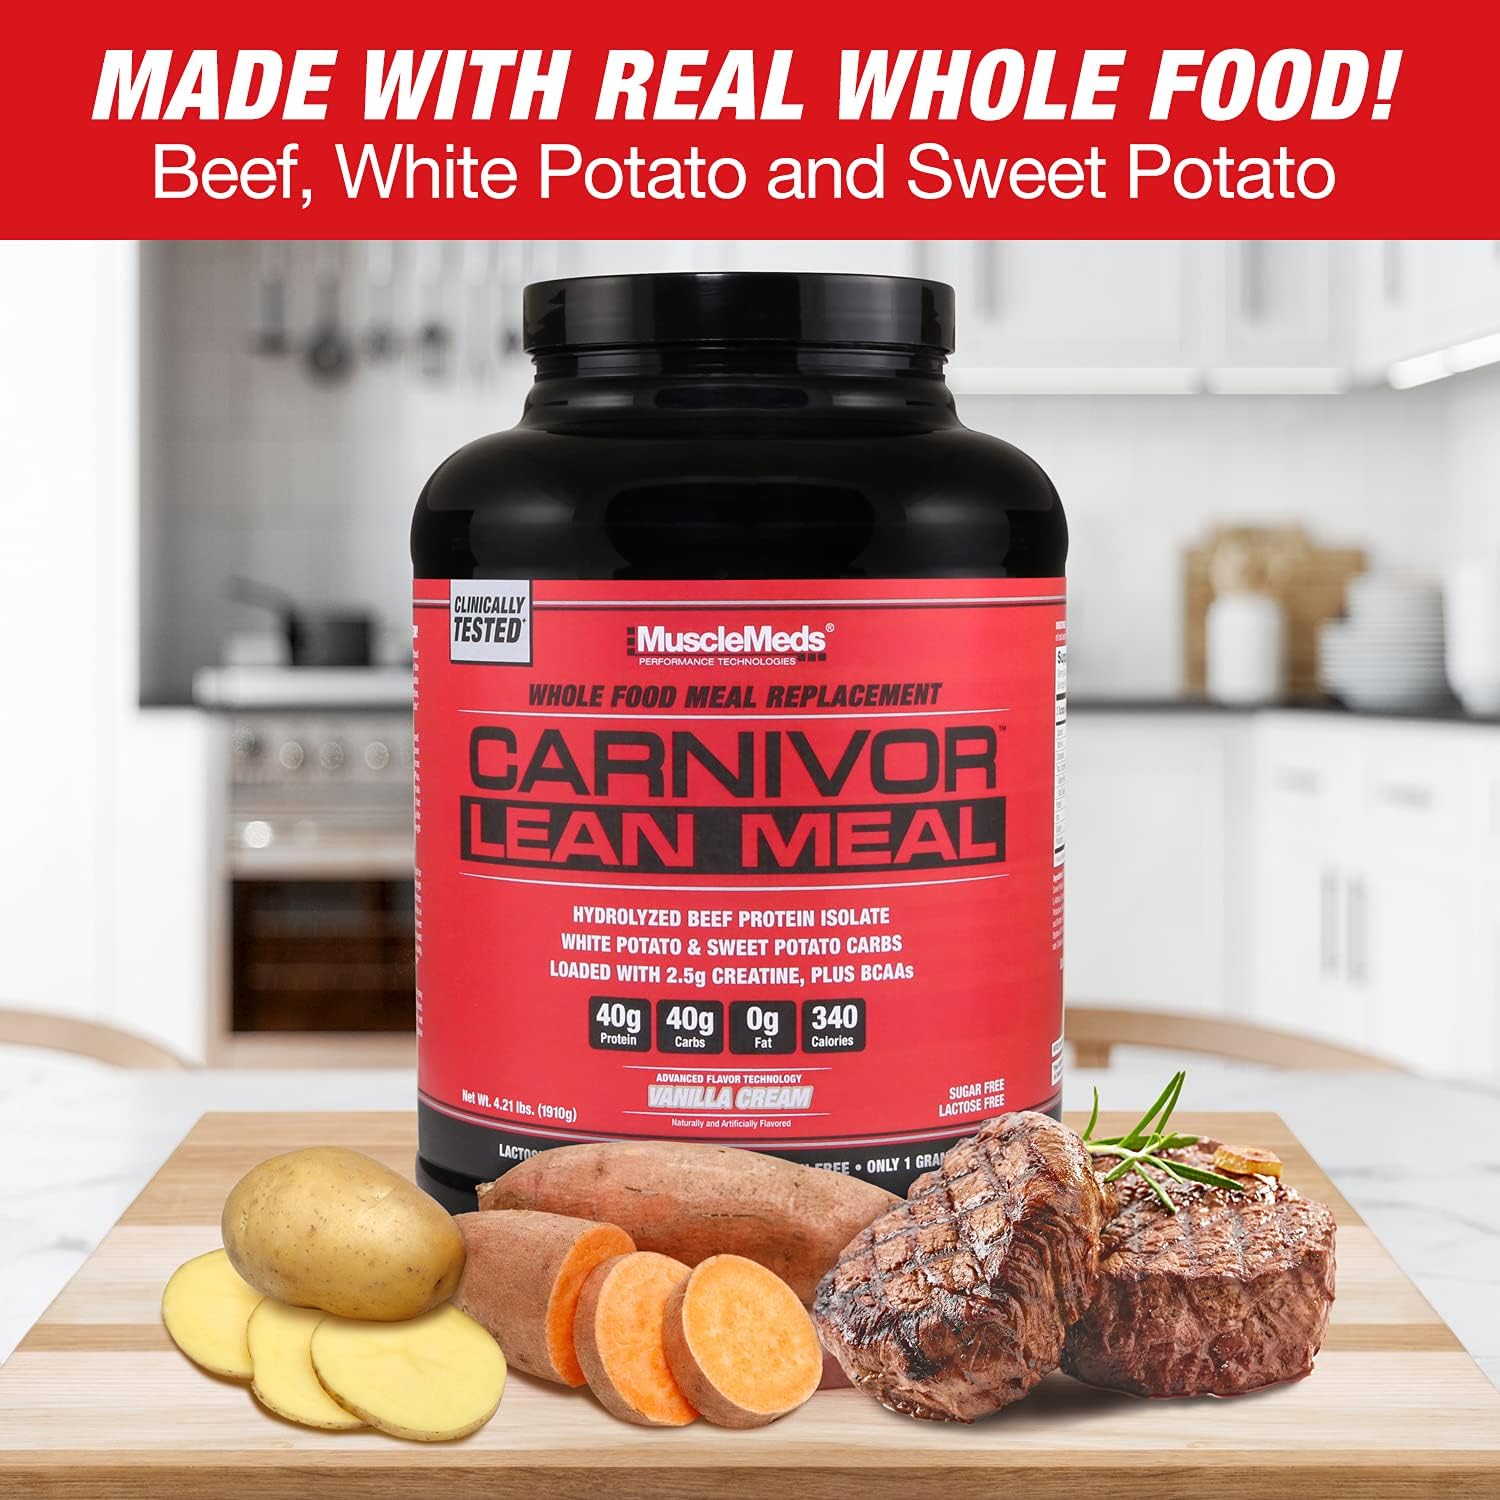 MuscleMeds CARNIVOR LEAN MEAL whole food meal replacement shake, MRE, 